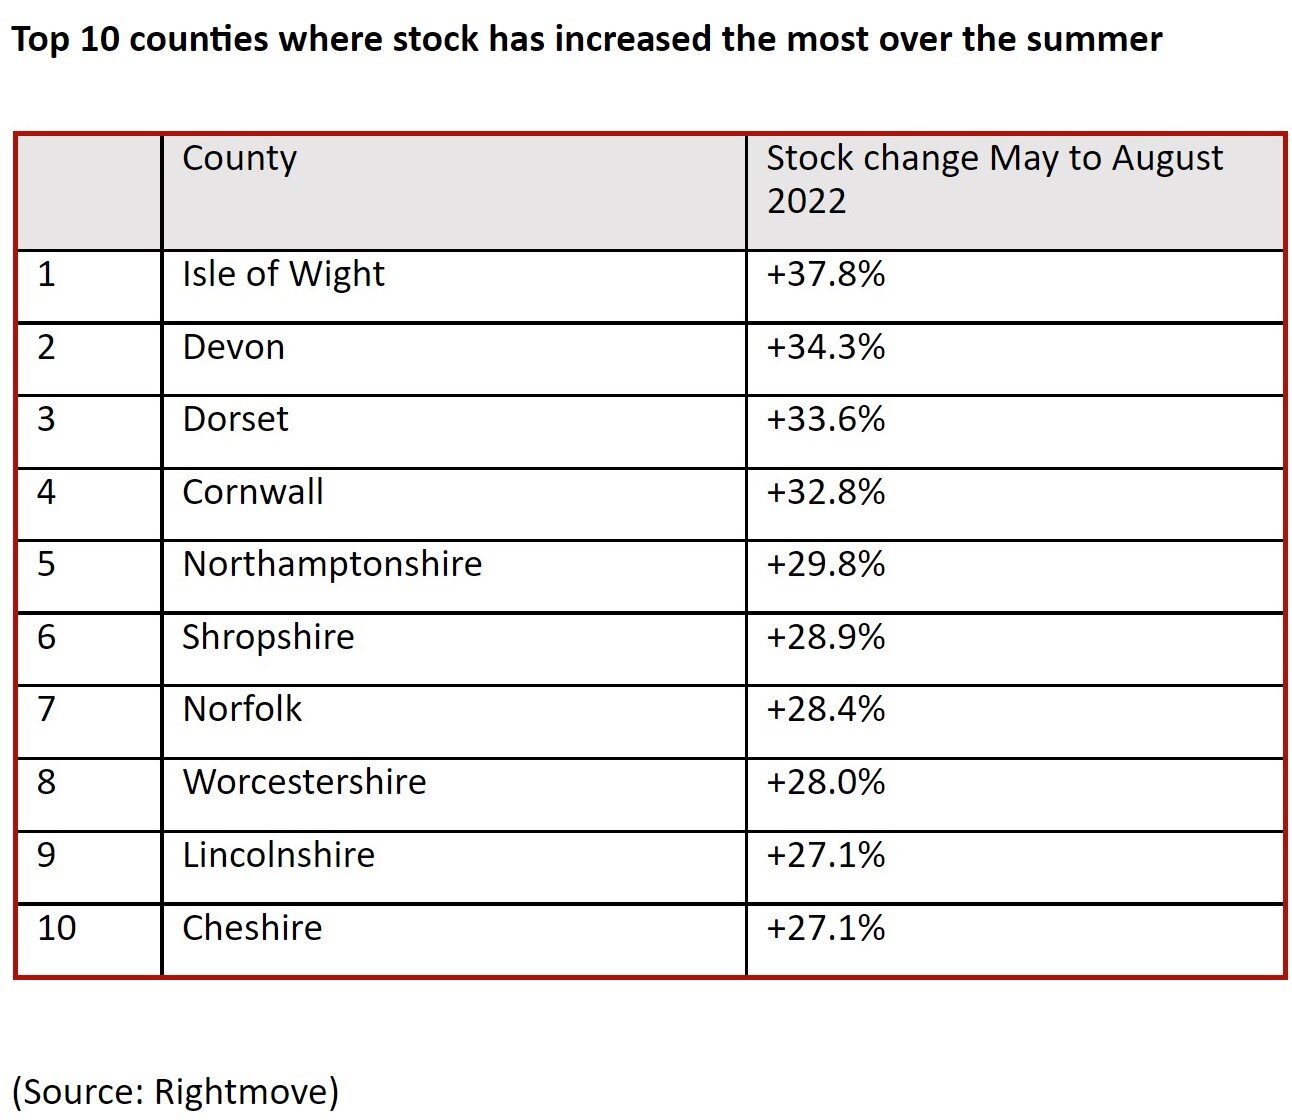 https://www.worldpropertyjournal.com/news-assets-2/Top%2010%20counties%20where%20stock%20has%20increased%20the%20most%20over%20the%20summer.jpg